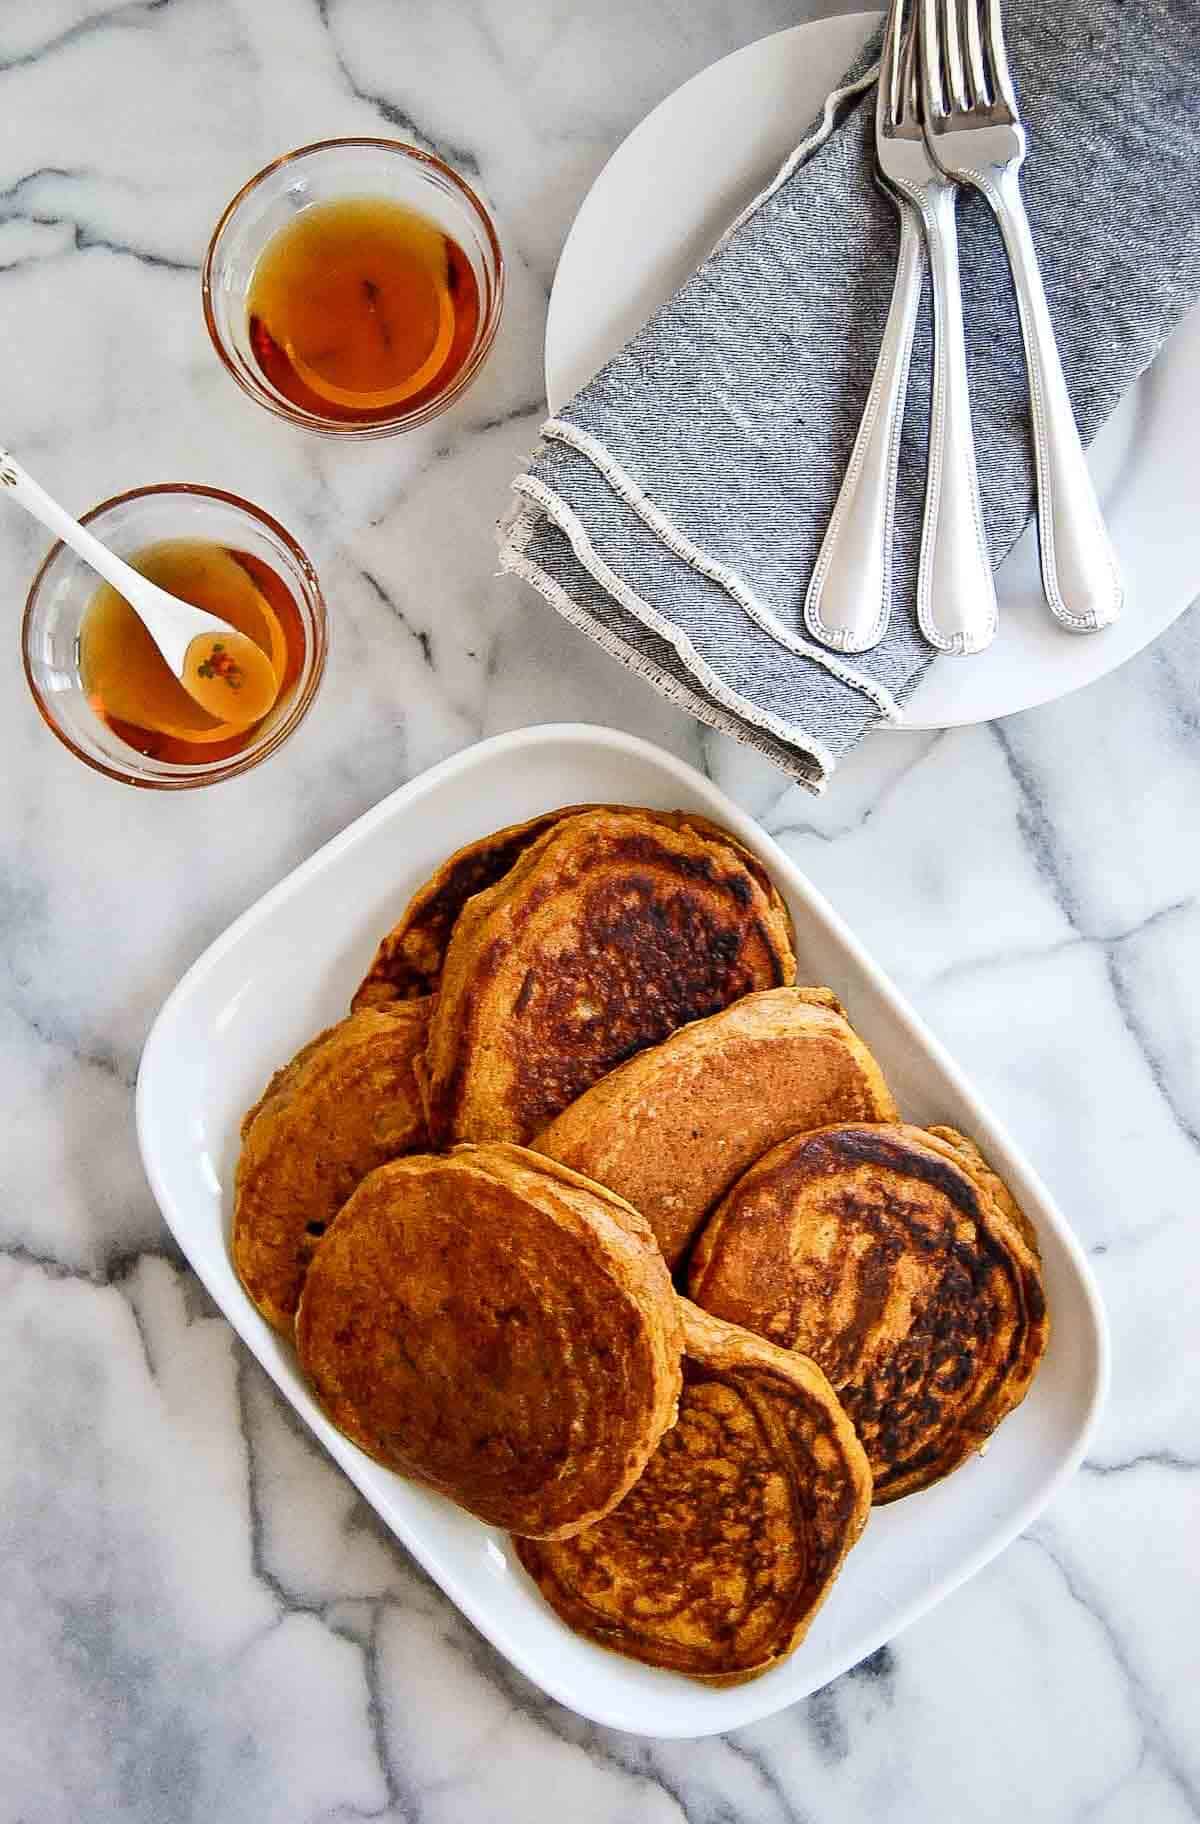 platter of pumpkin pancakes from pancake mix with maple syrup on the side.